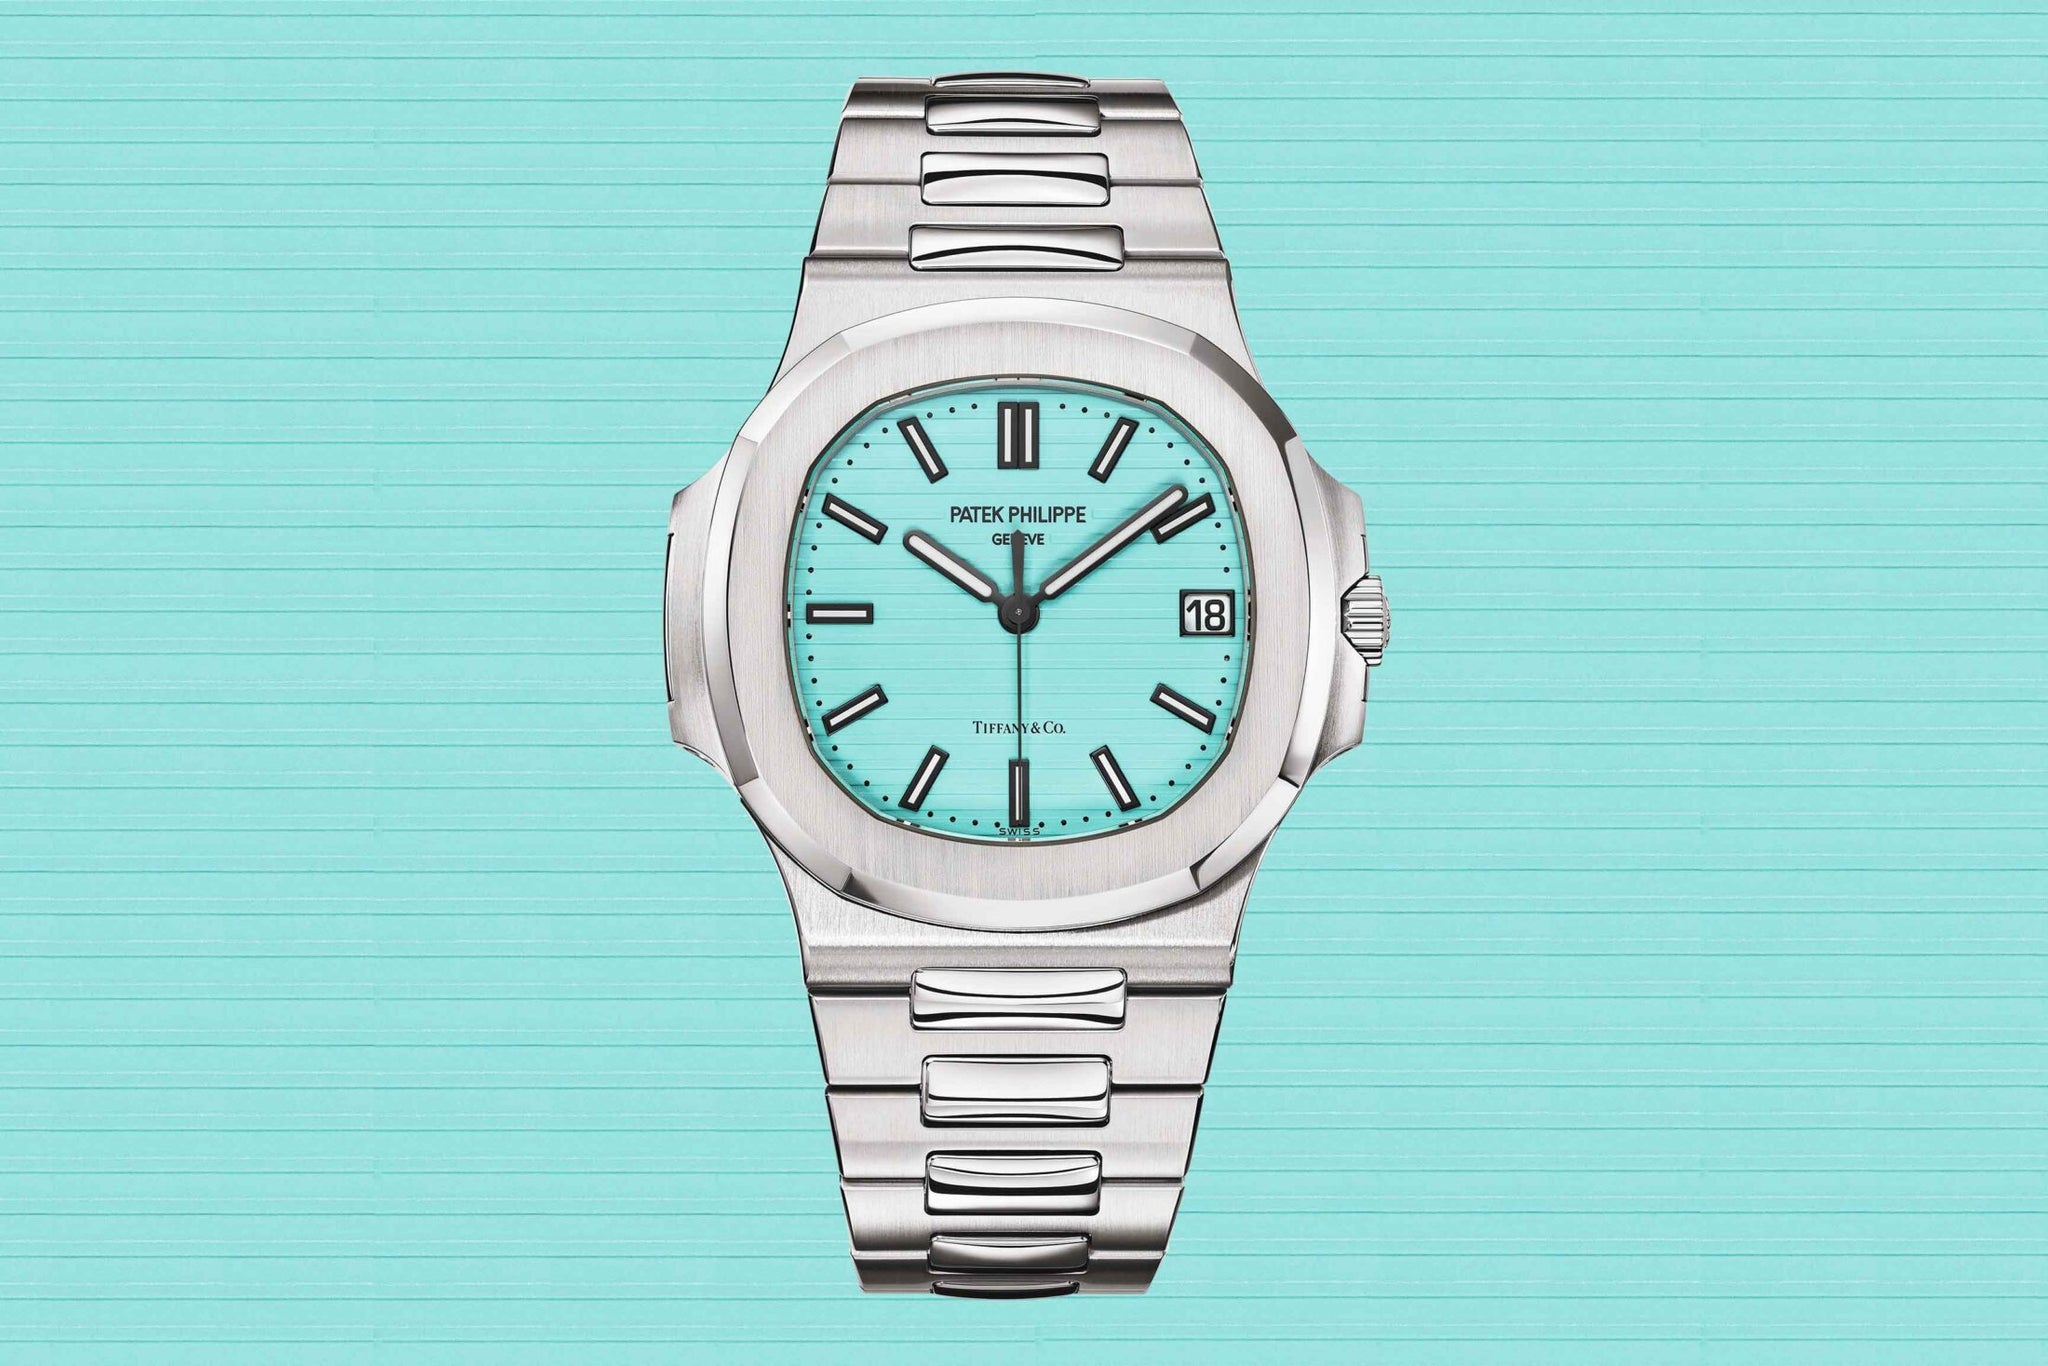 How Tiffany & Co. and Patek Philippe teamed up for the last-ever Nautilus  5711: the luxury watchmaker's most sought-after timepiece gets a 'final'  limited edition run in Tiffany Blue